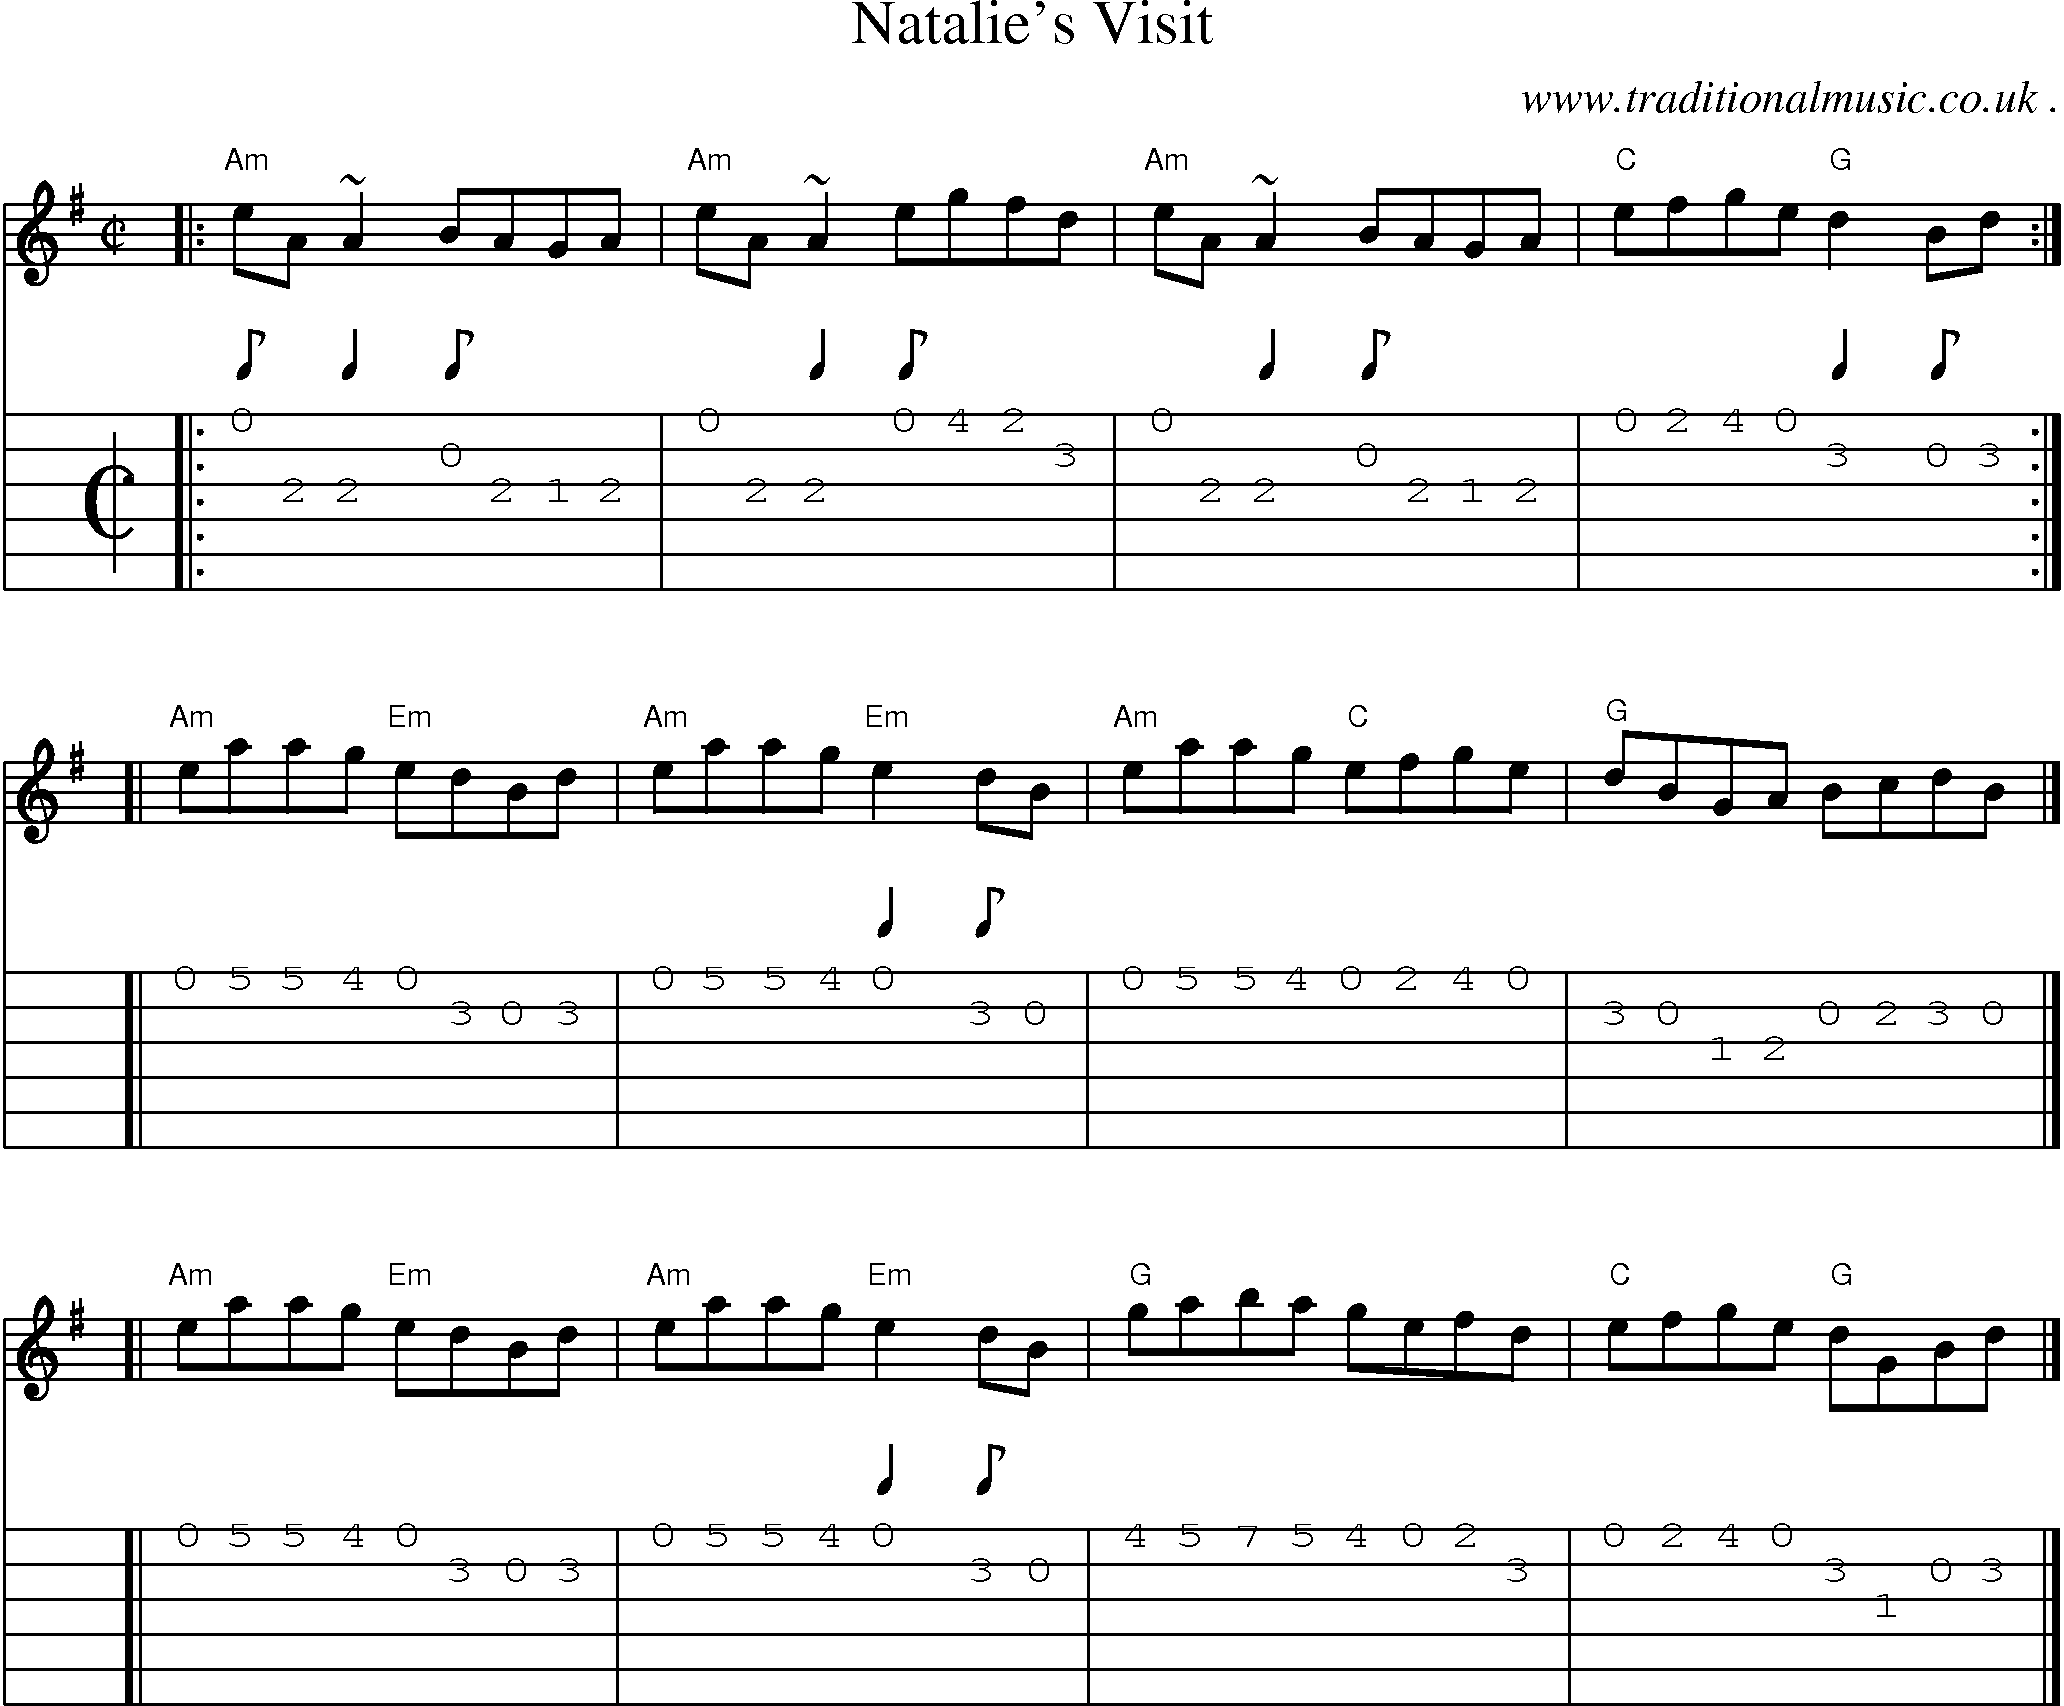 Sheet-music  score, Chords and Guitar Tabs for Natalies Visit